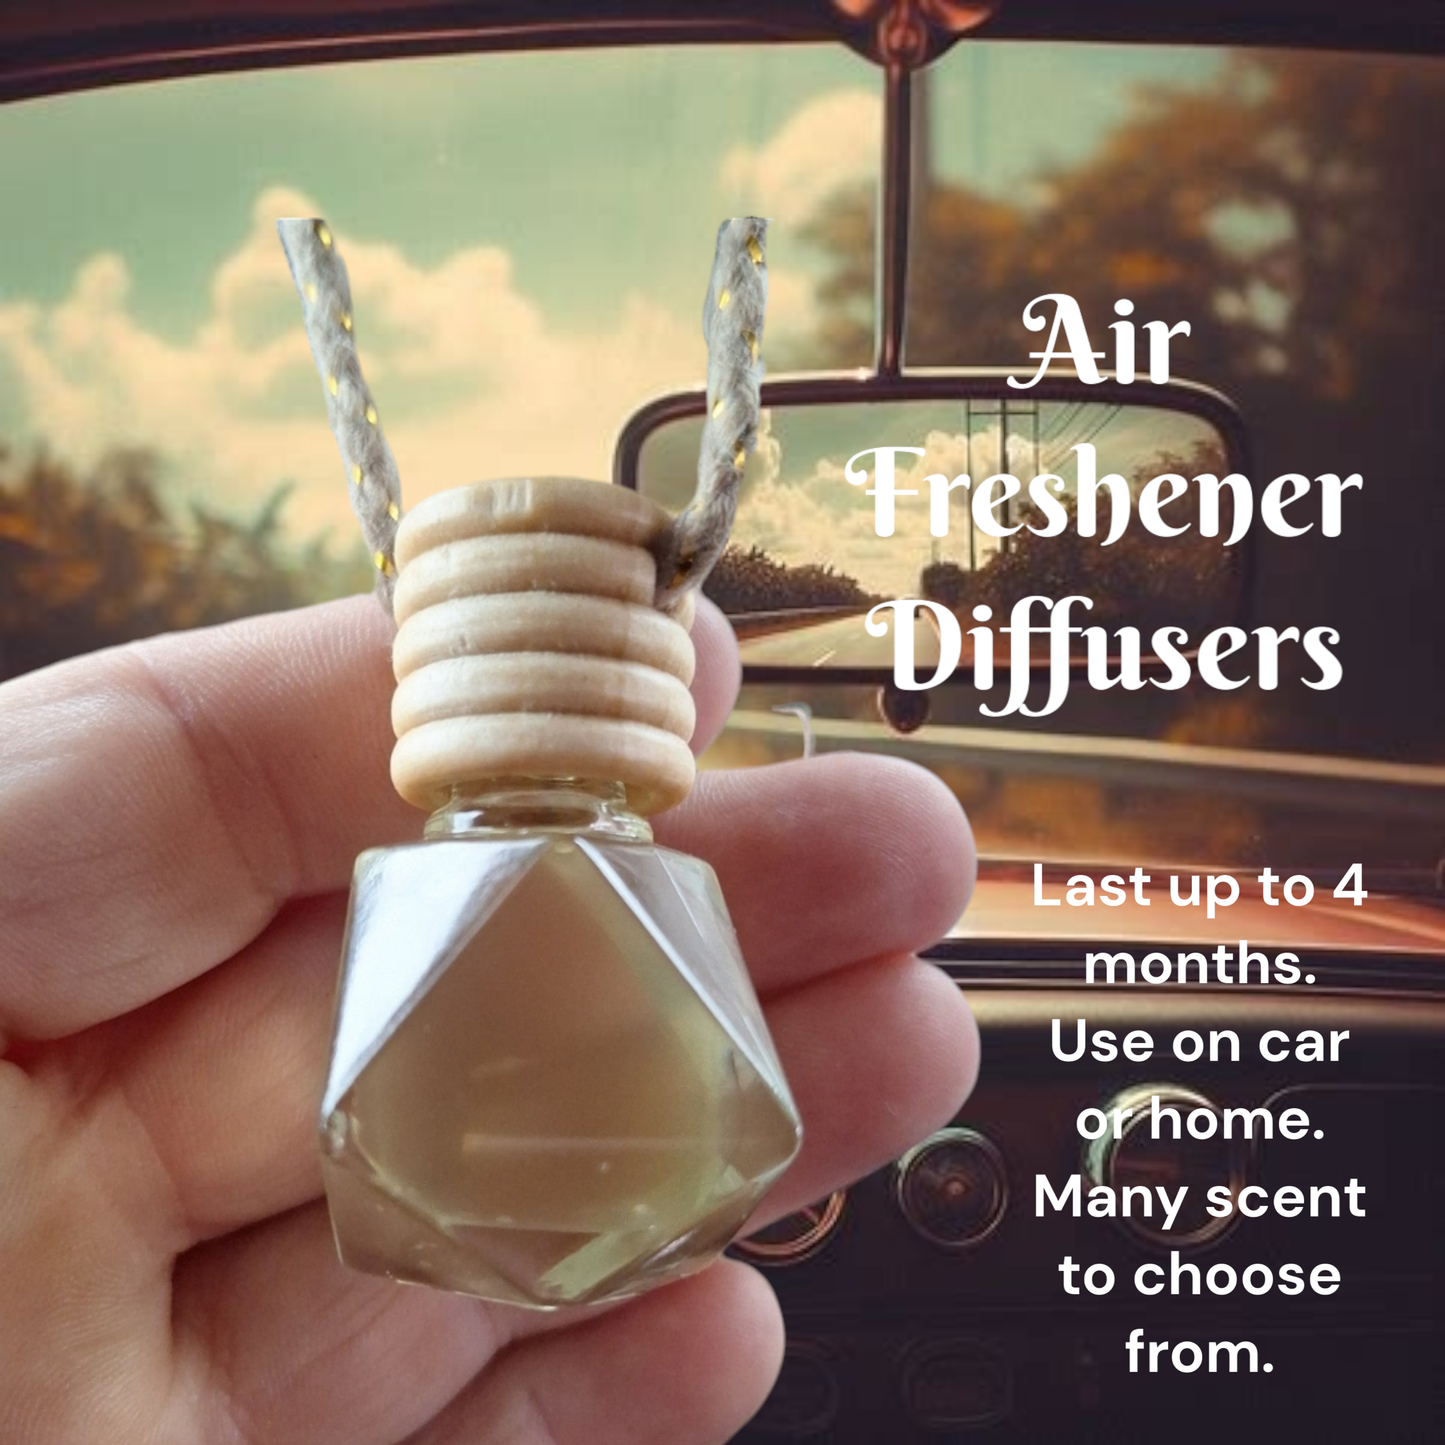 Amber Lavender Clense Air Freshener Diffuser for your car or home.